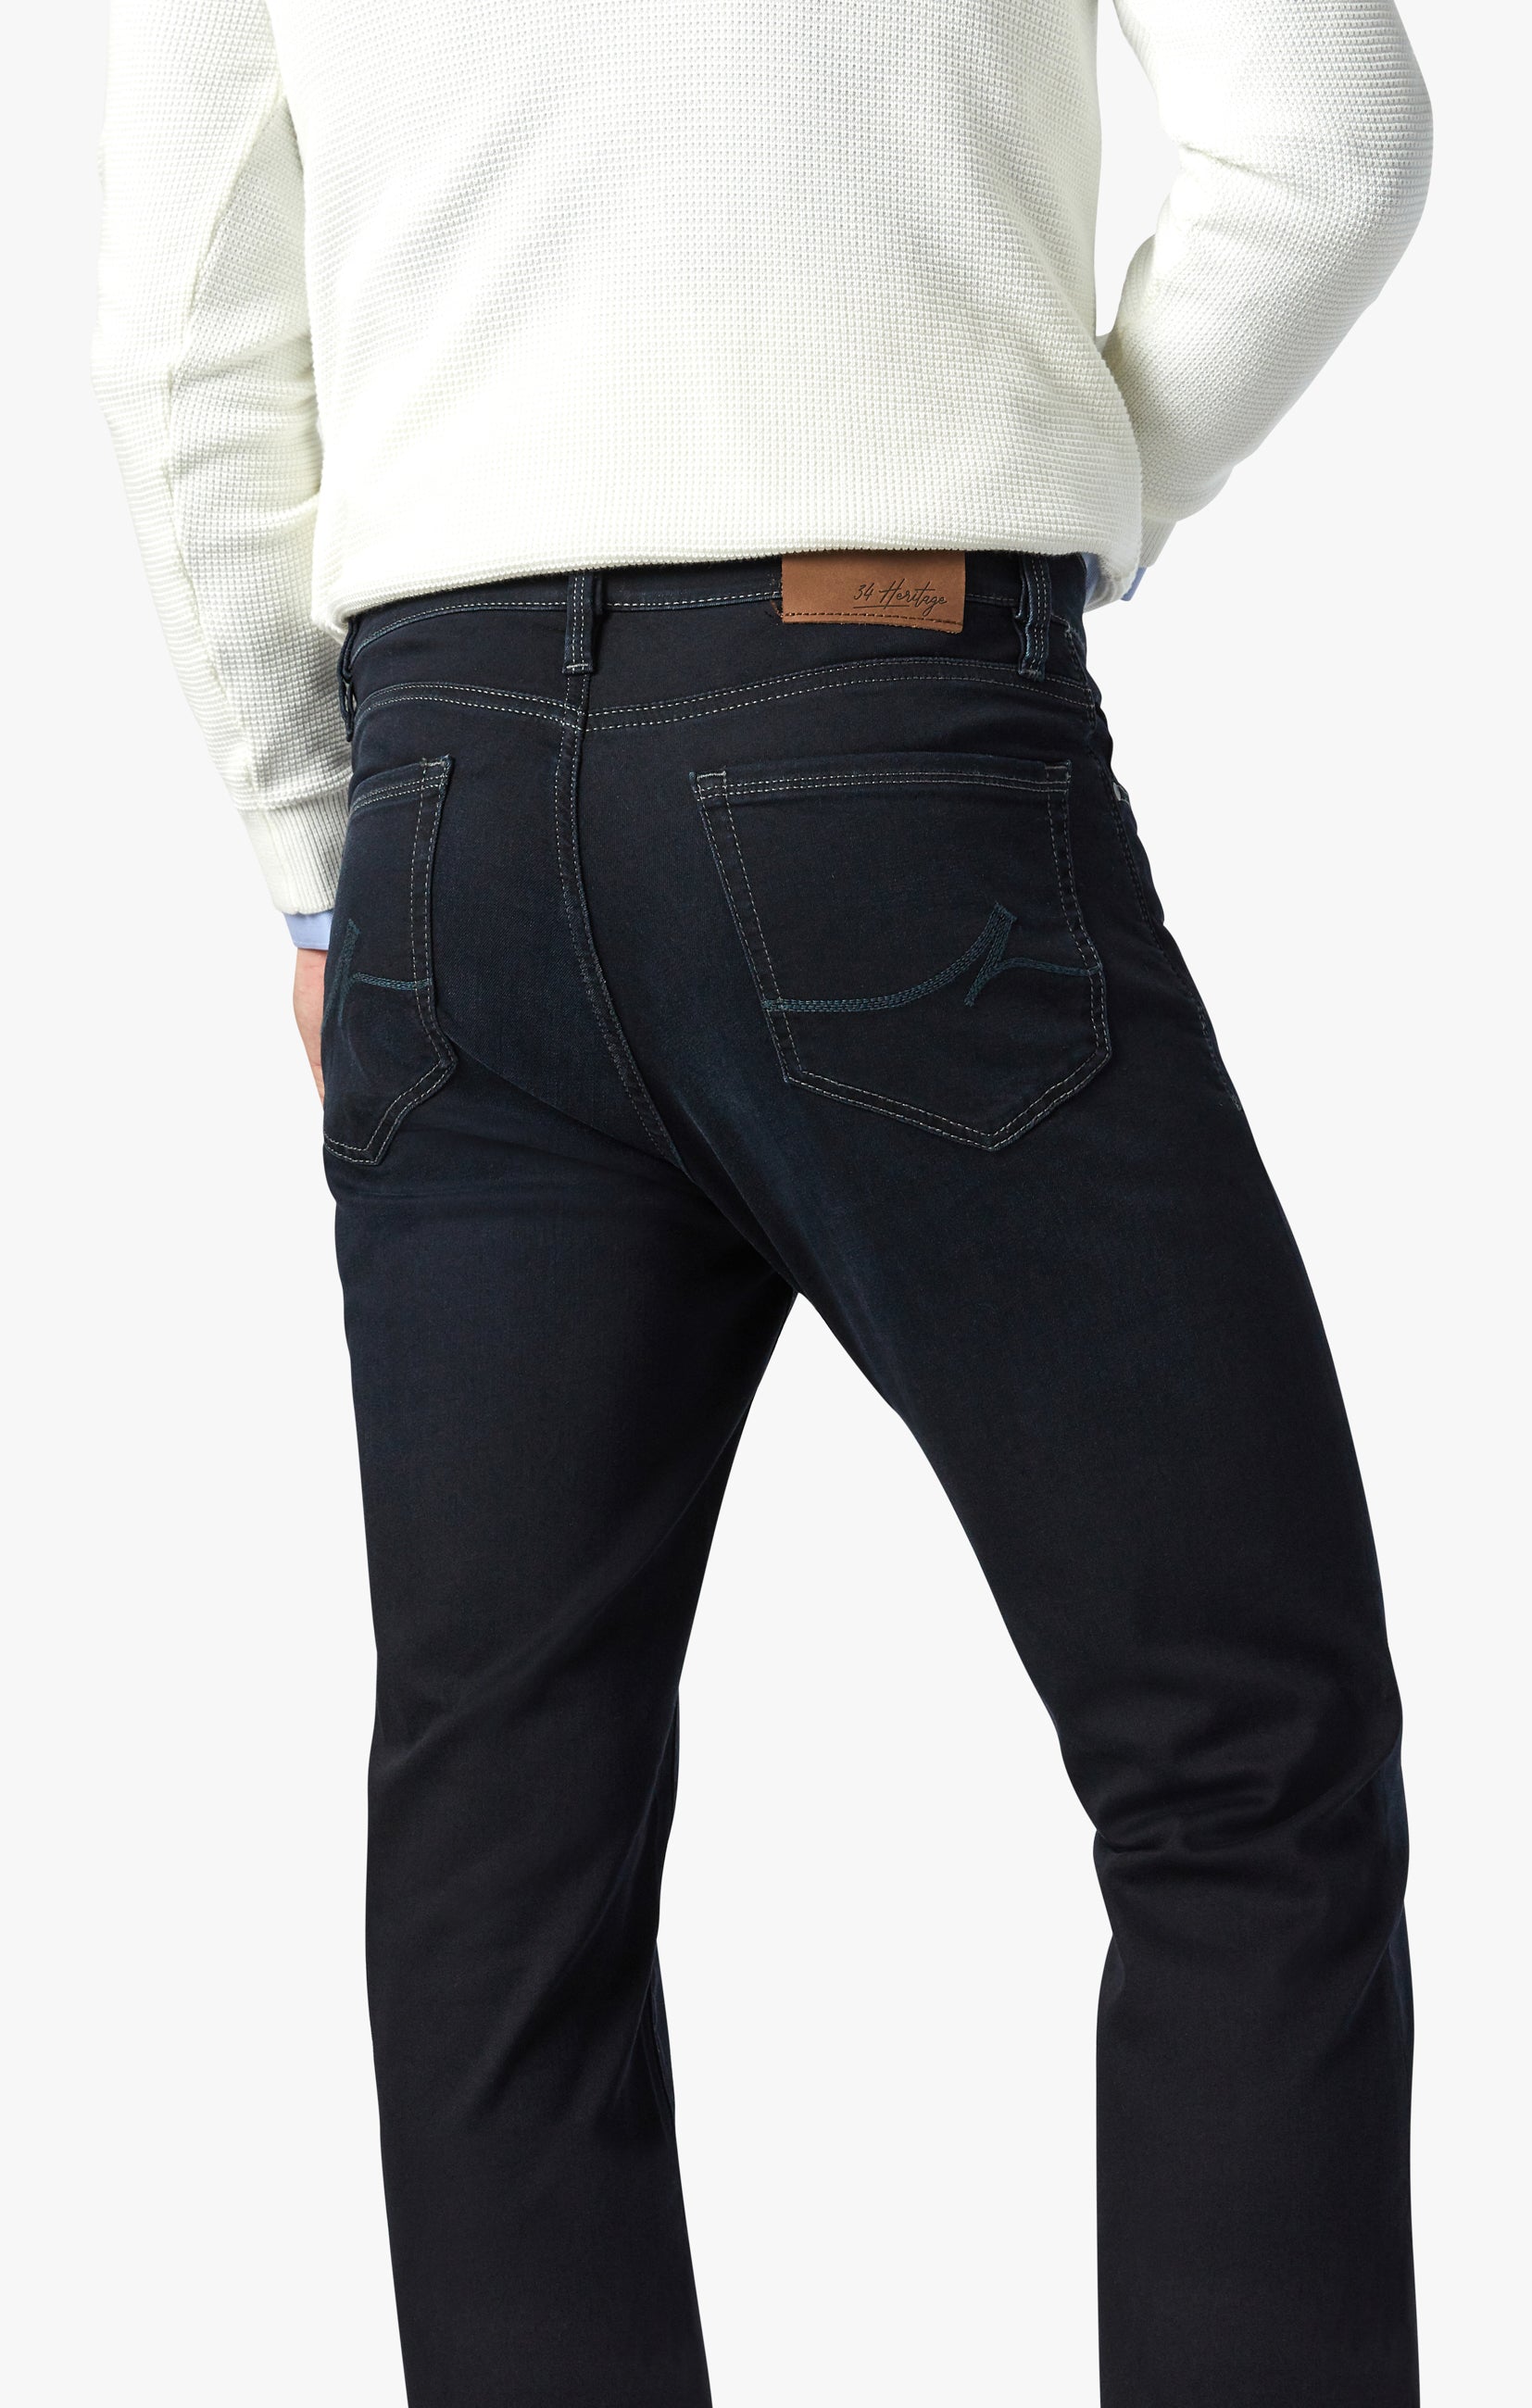 Champ Athletic Fit Jeans in Midnight Austin Image 8